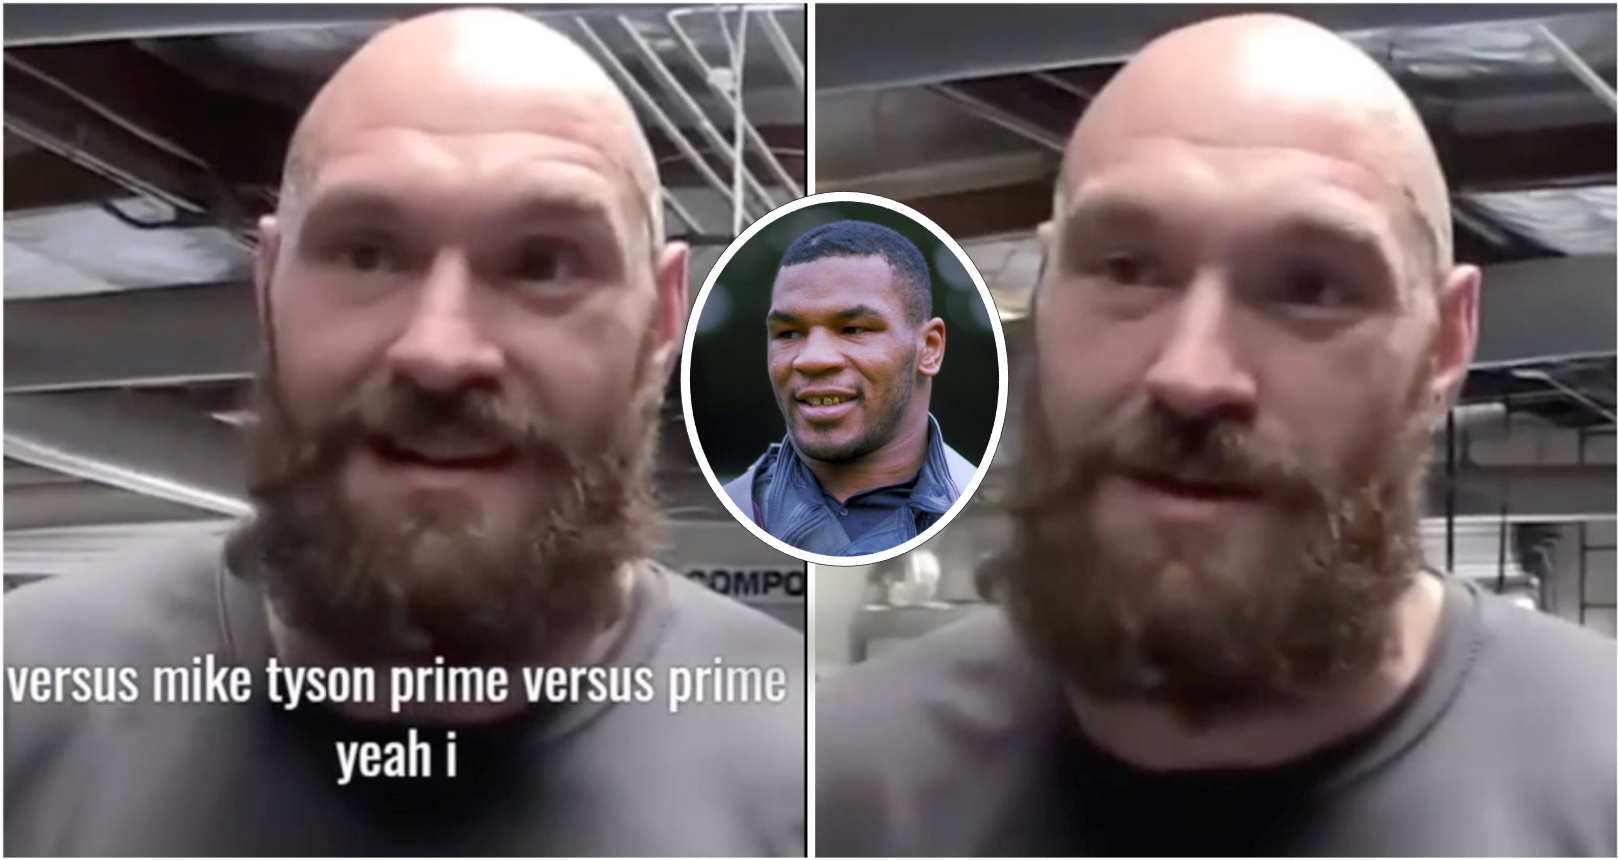 Tyson Fury vs Mike Tyson: Gypsy King answers who wins in their prime